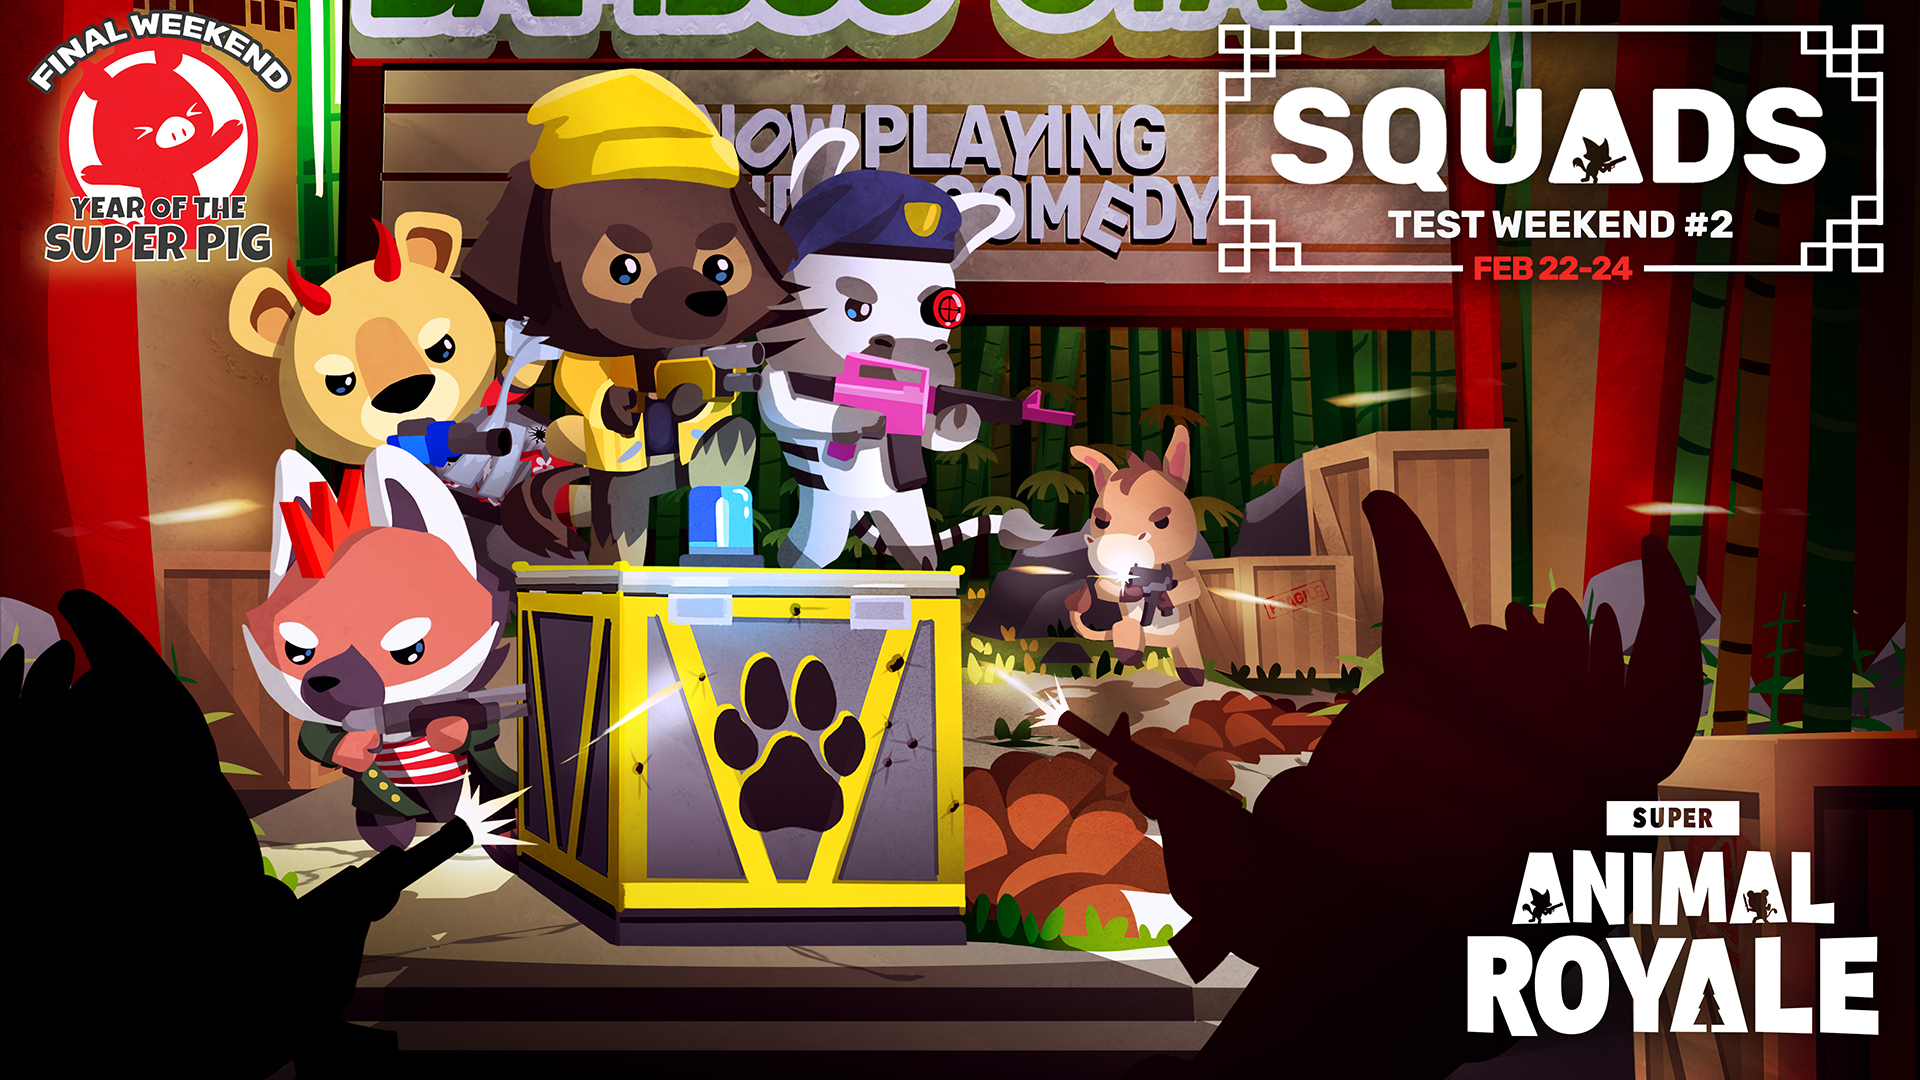 Super Animal Royale Weekend 2 + Final Days to Earn Year of the Super Pig Items!